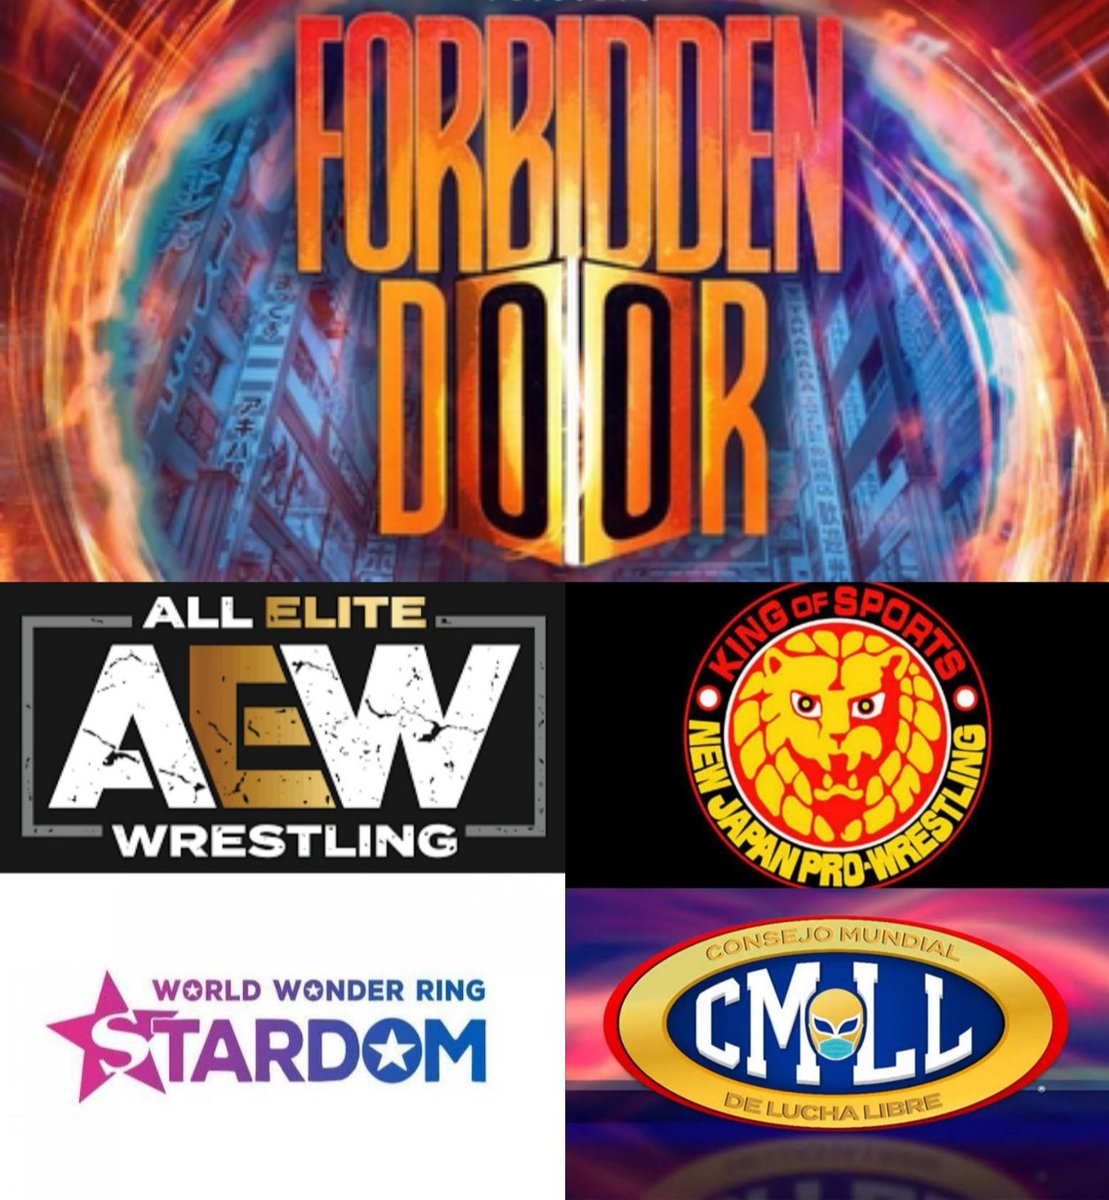 Per Fightful and Rocky Romero himself... Stardom will 'definitely' be a part of this year's AEWxNJPW Forbidden Door PPV, and that CMLL 'very likely' will as well.

LET'S GO.